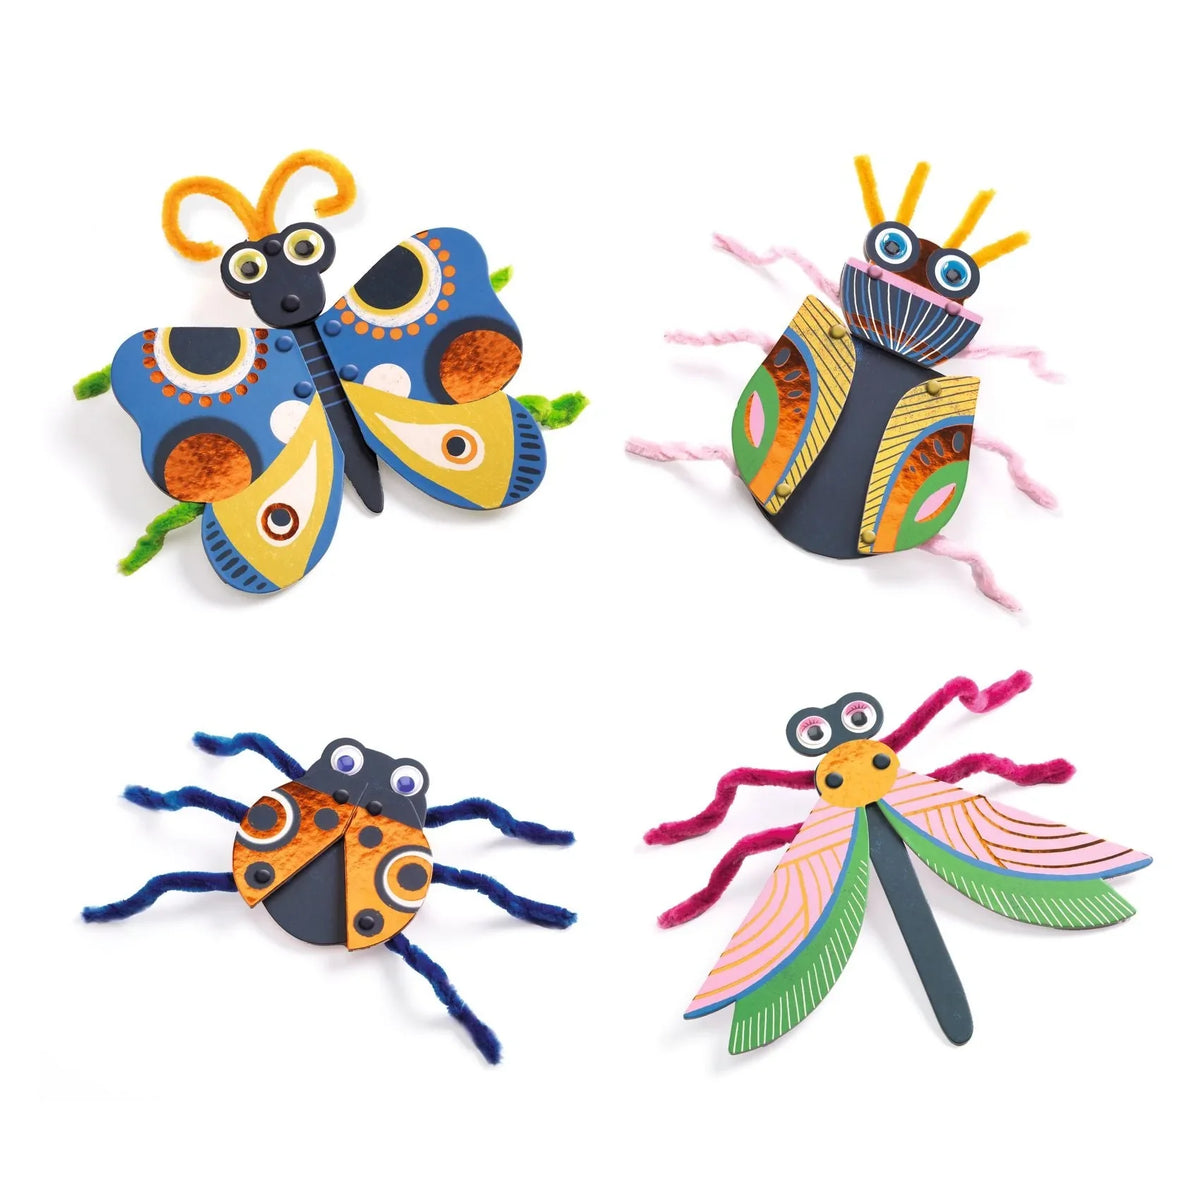 3D Collage Fuzzy Bugs by Djeco